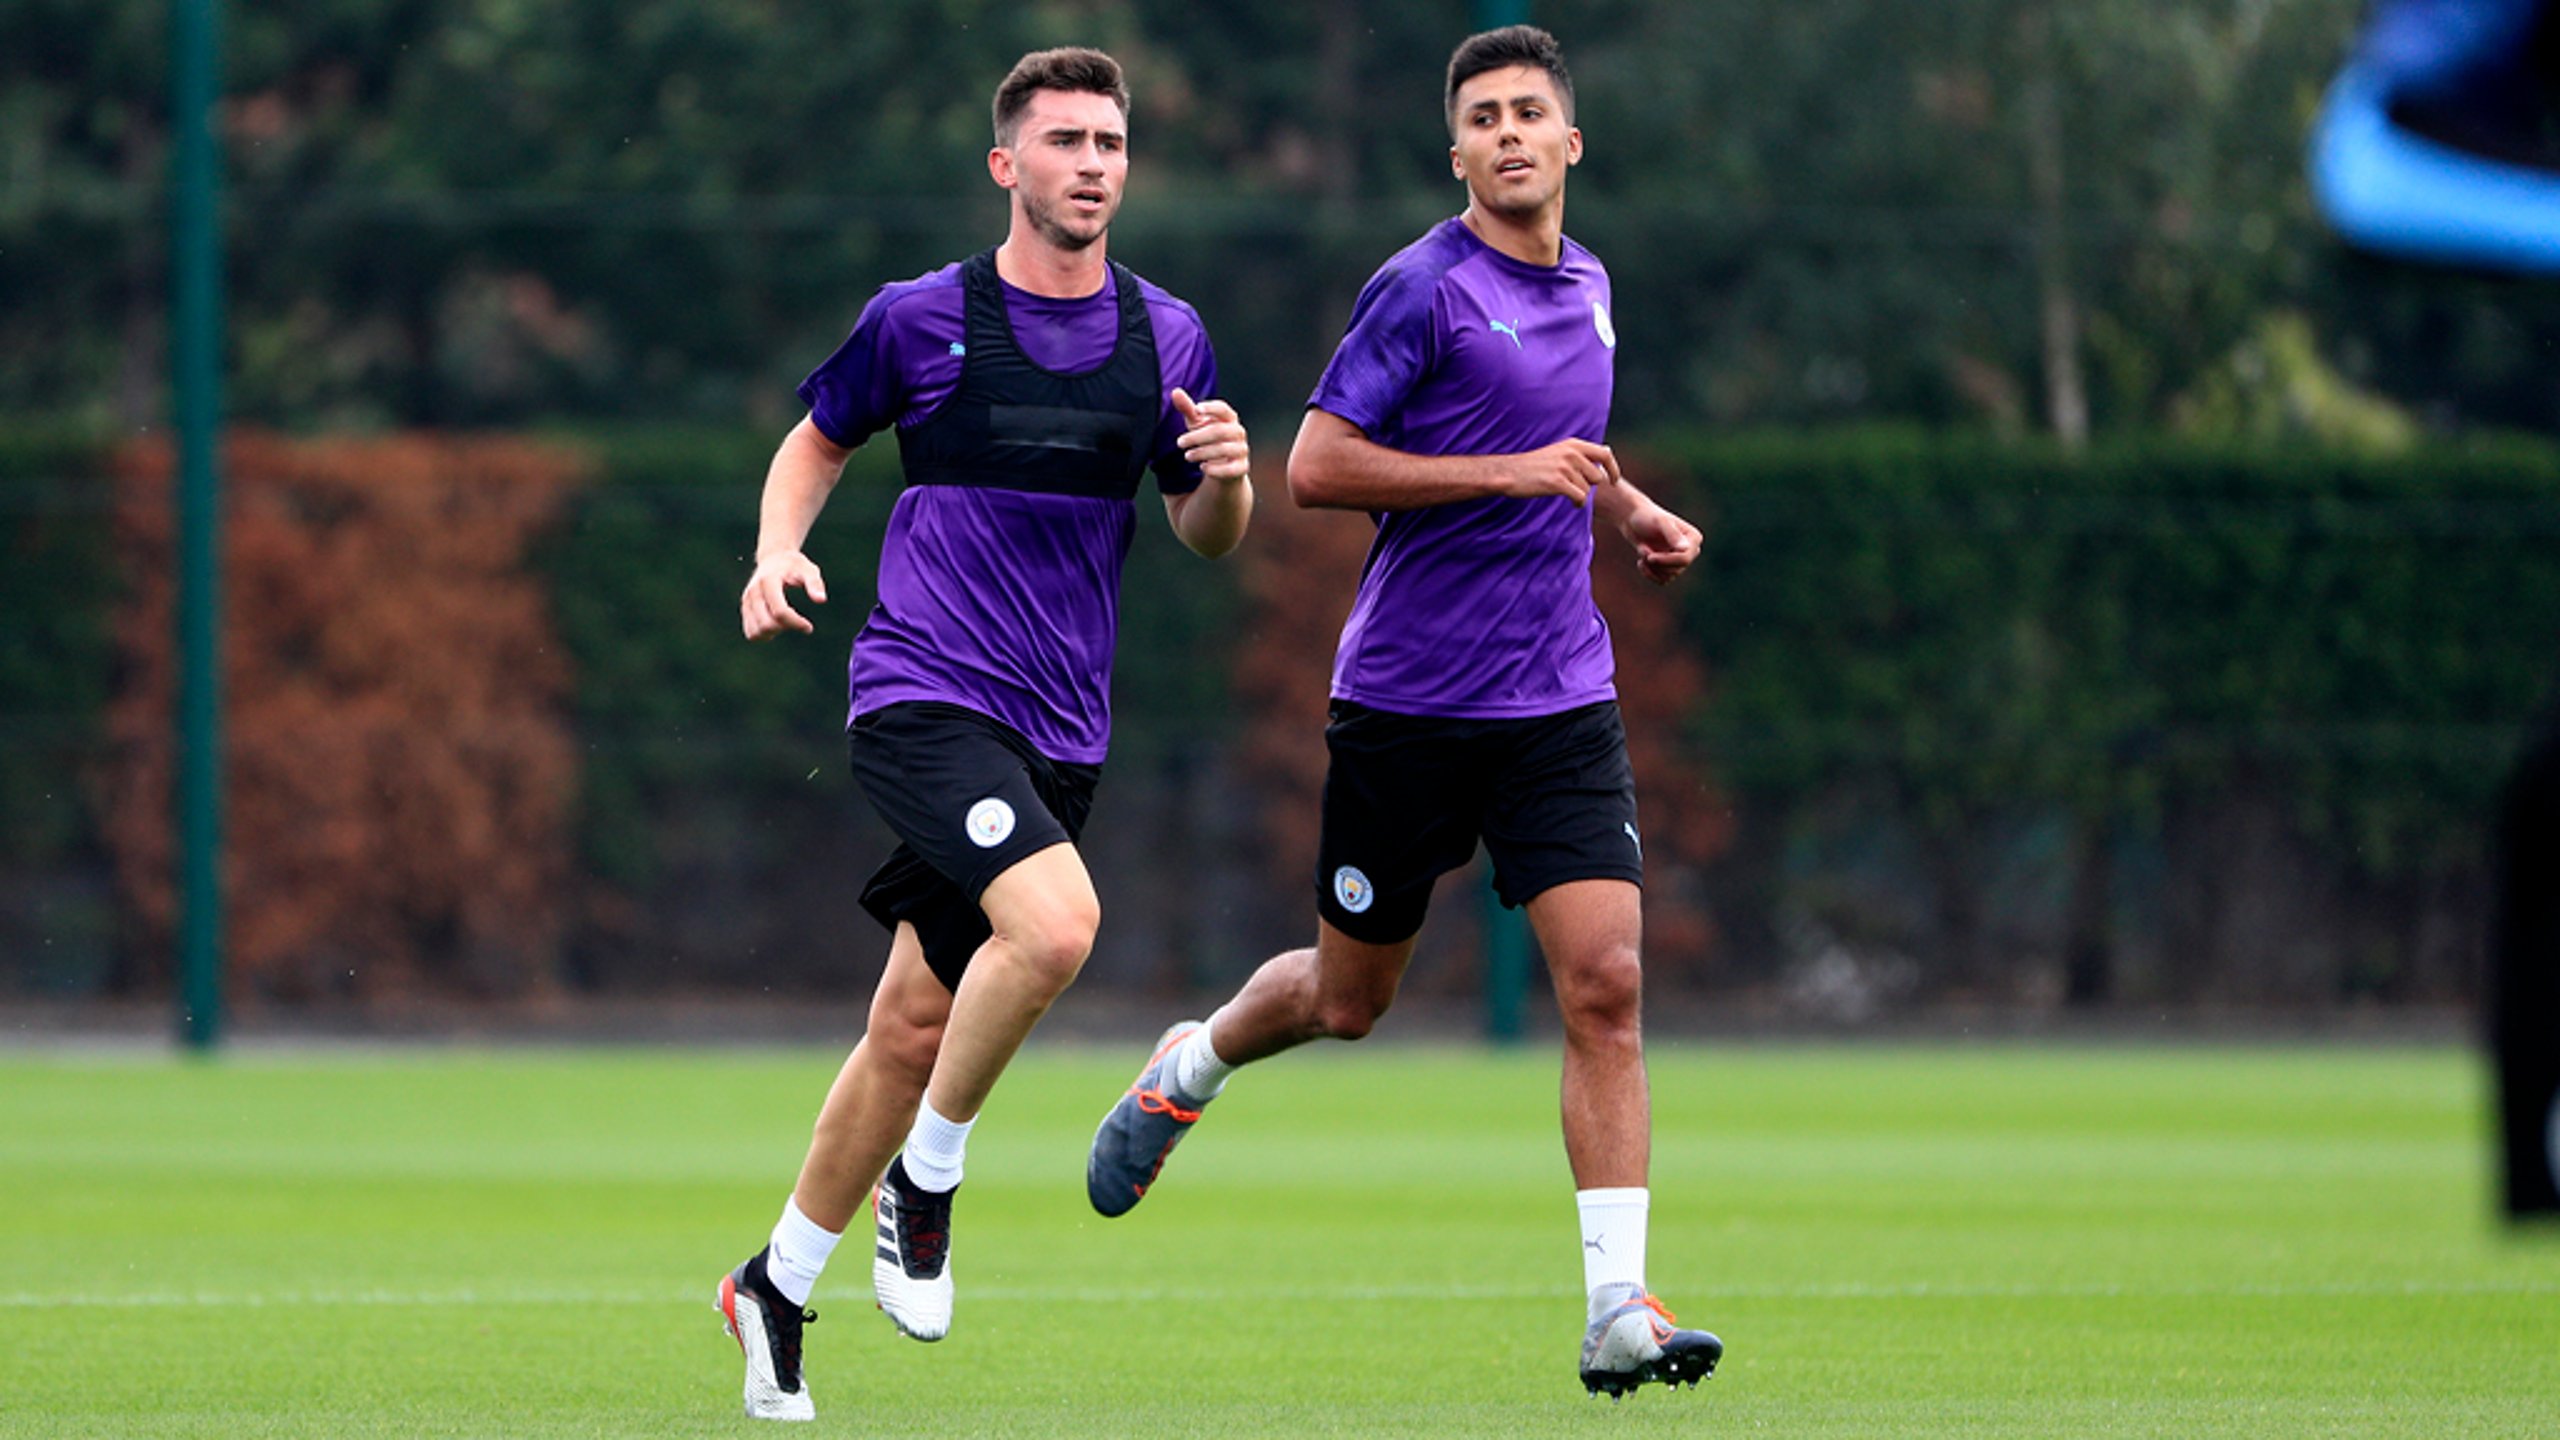 BLUES BROTHERS: Aymeric Laporte and new signing Rodri step up their fitness drills